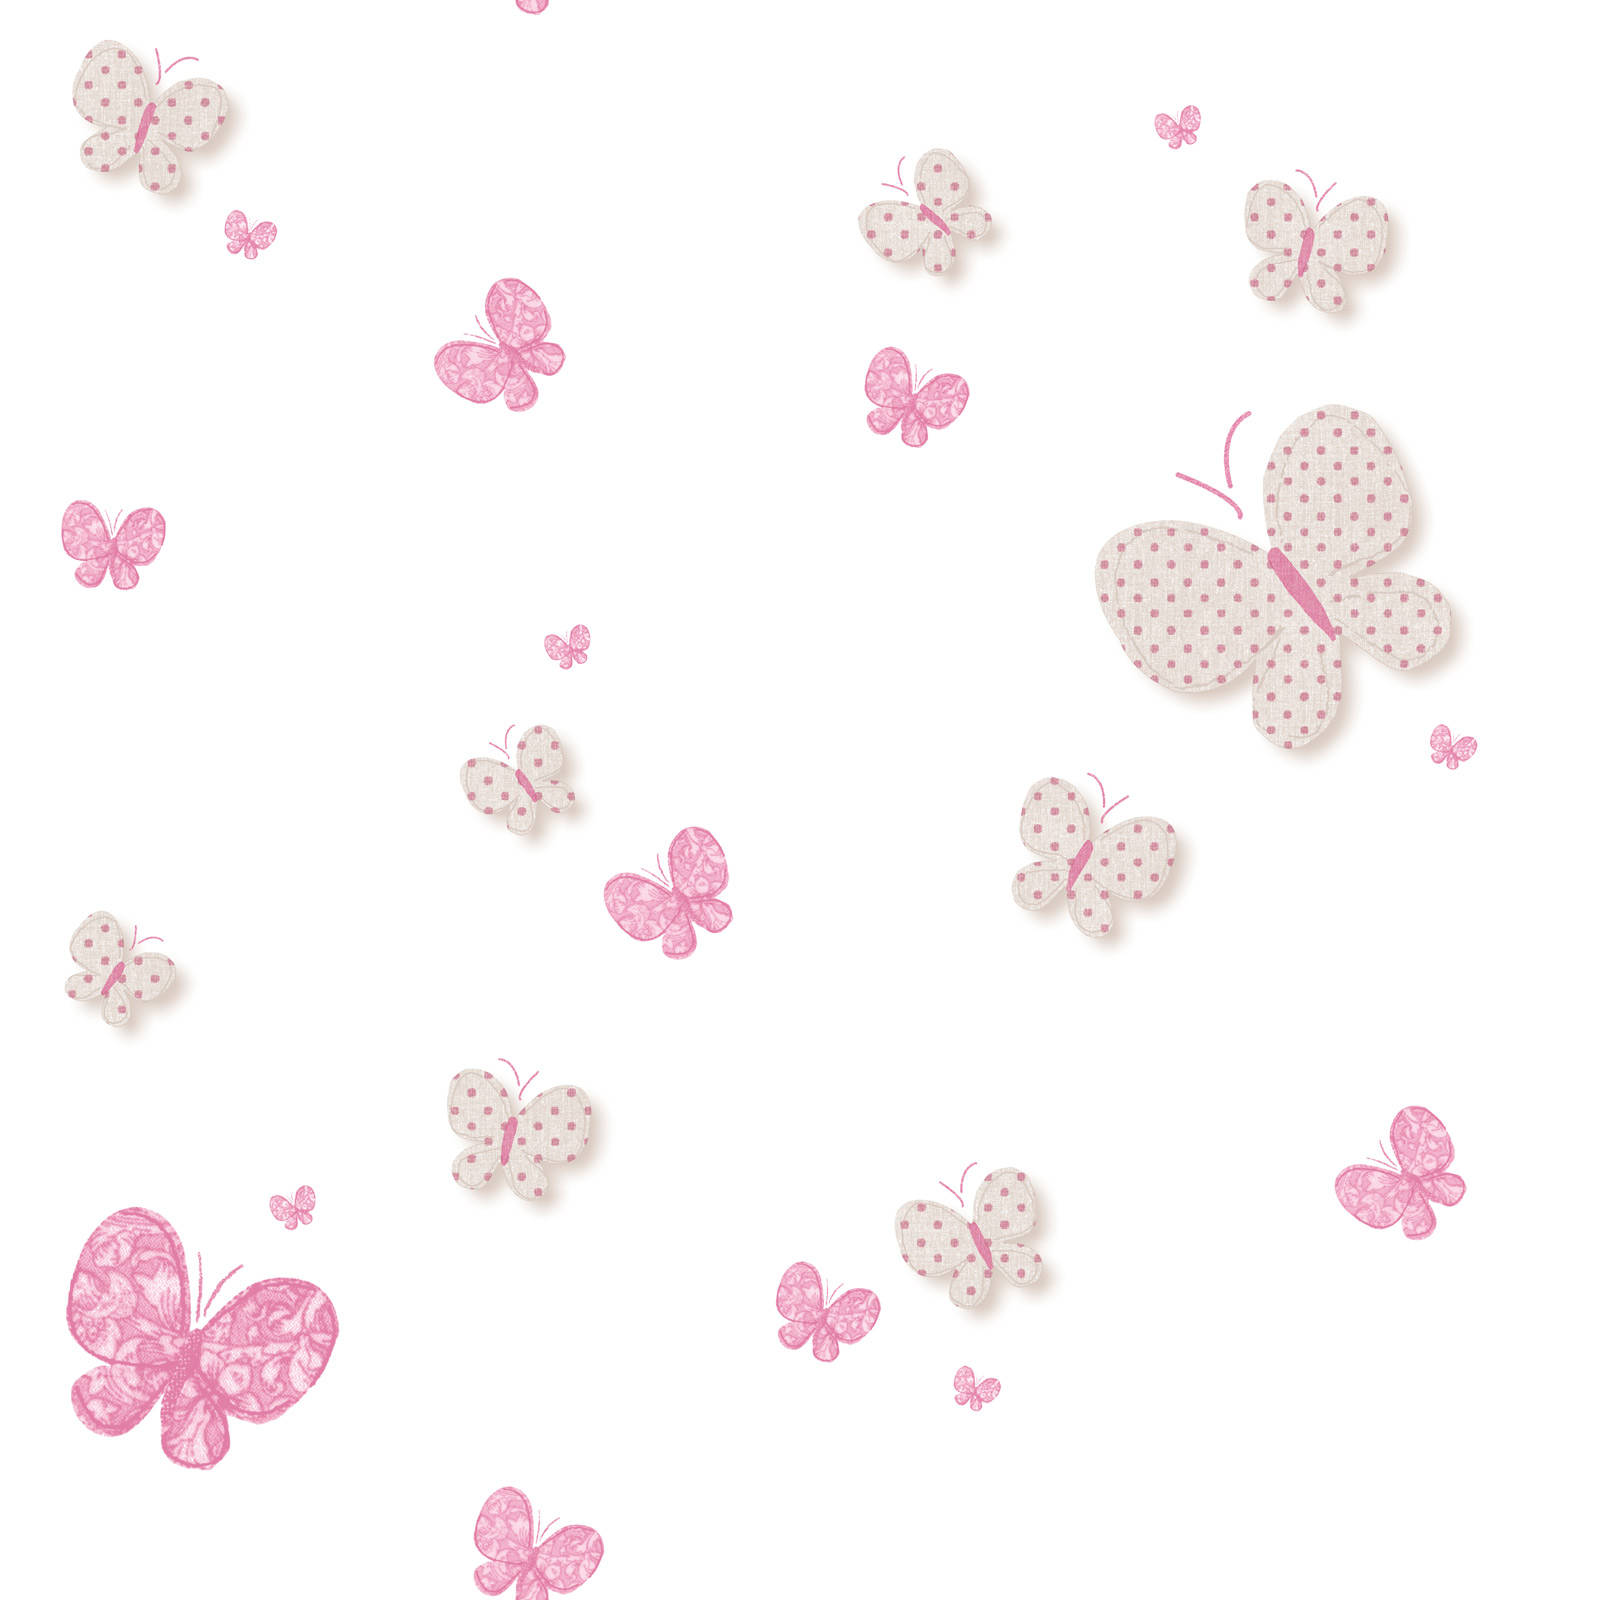 White Polkadots And Cute Pink Butterfly Insects Background